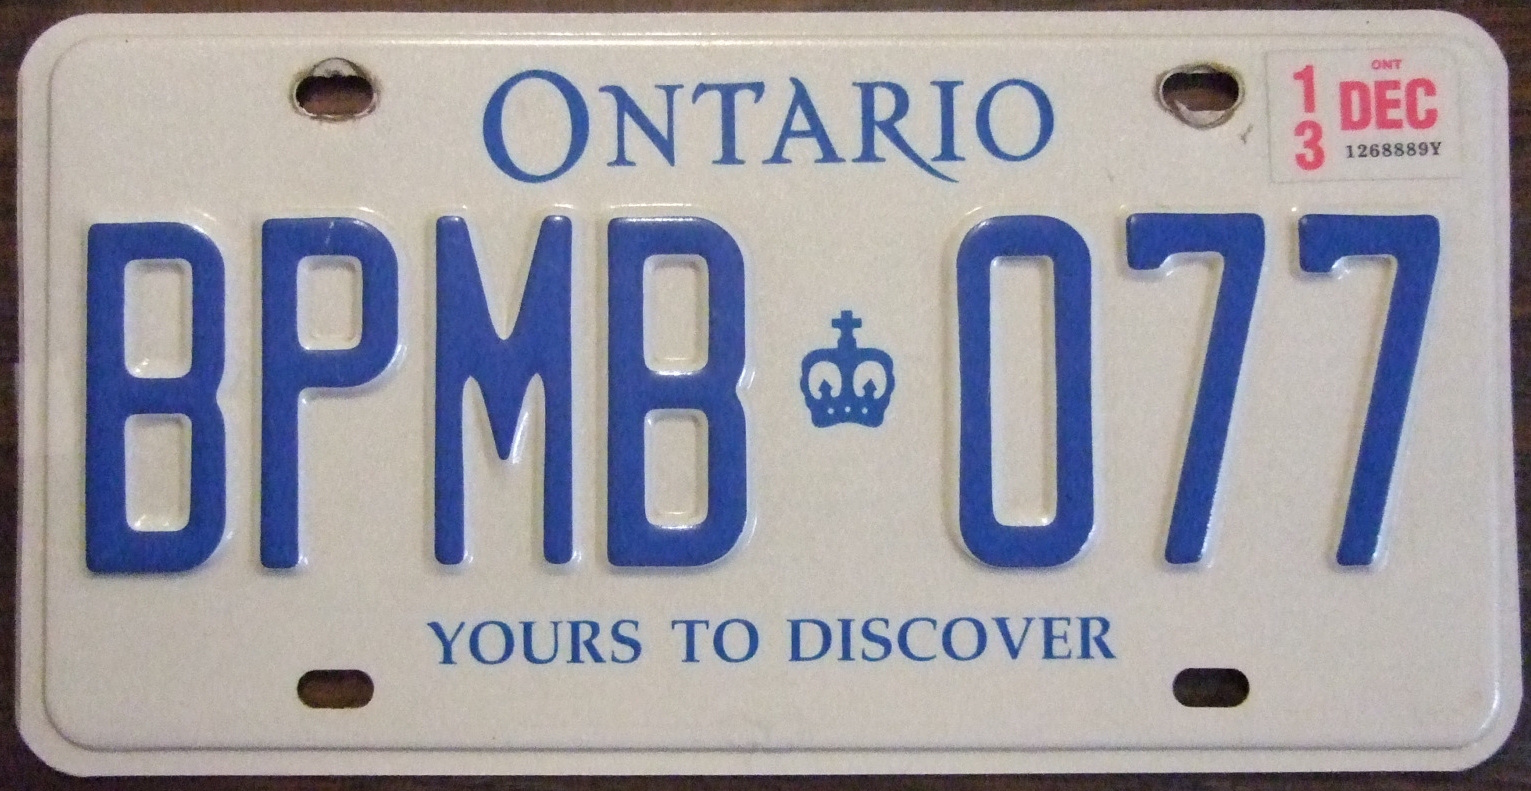 Cornwall man arrested in possession of stolen license plates